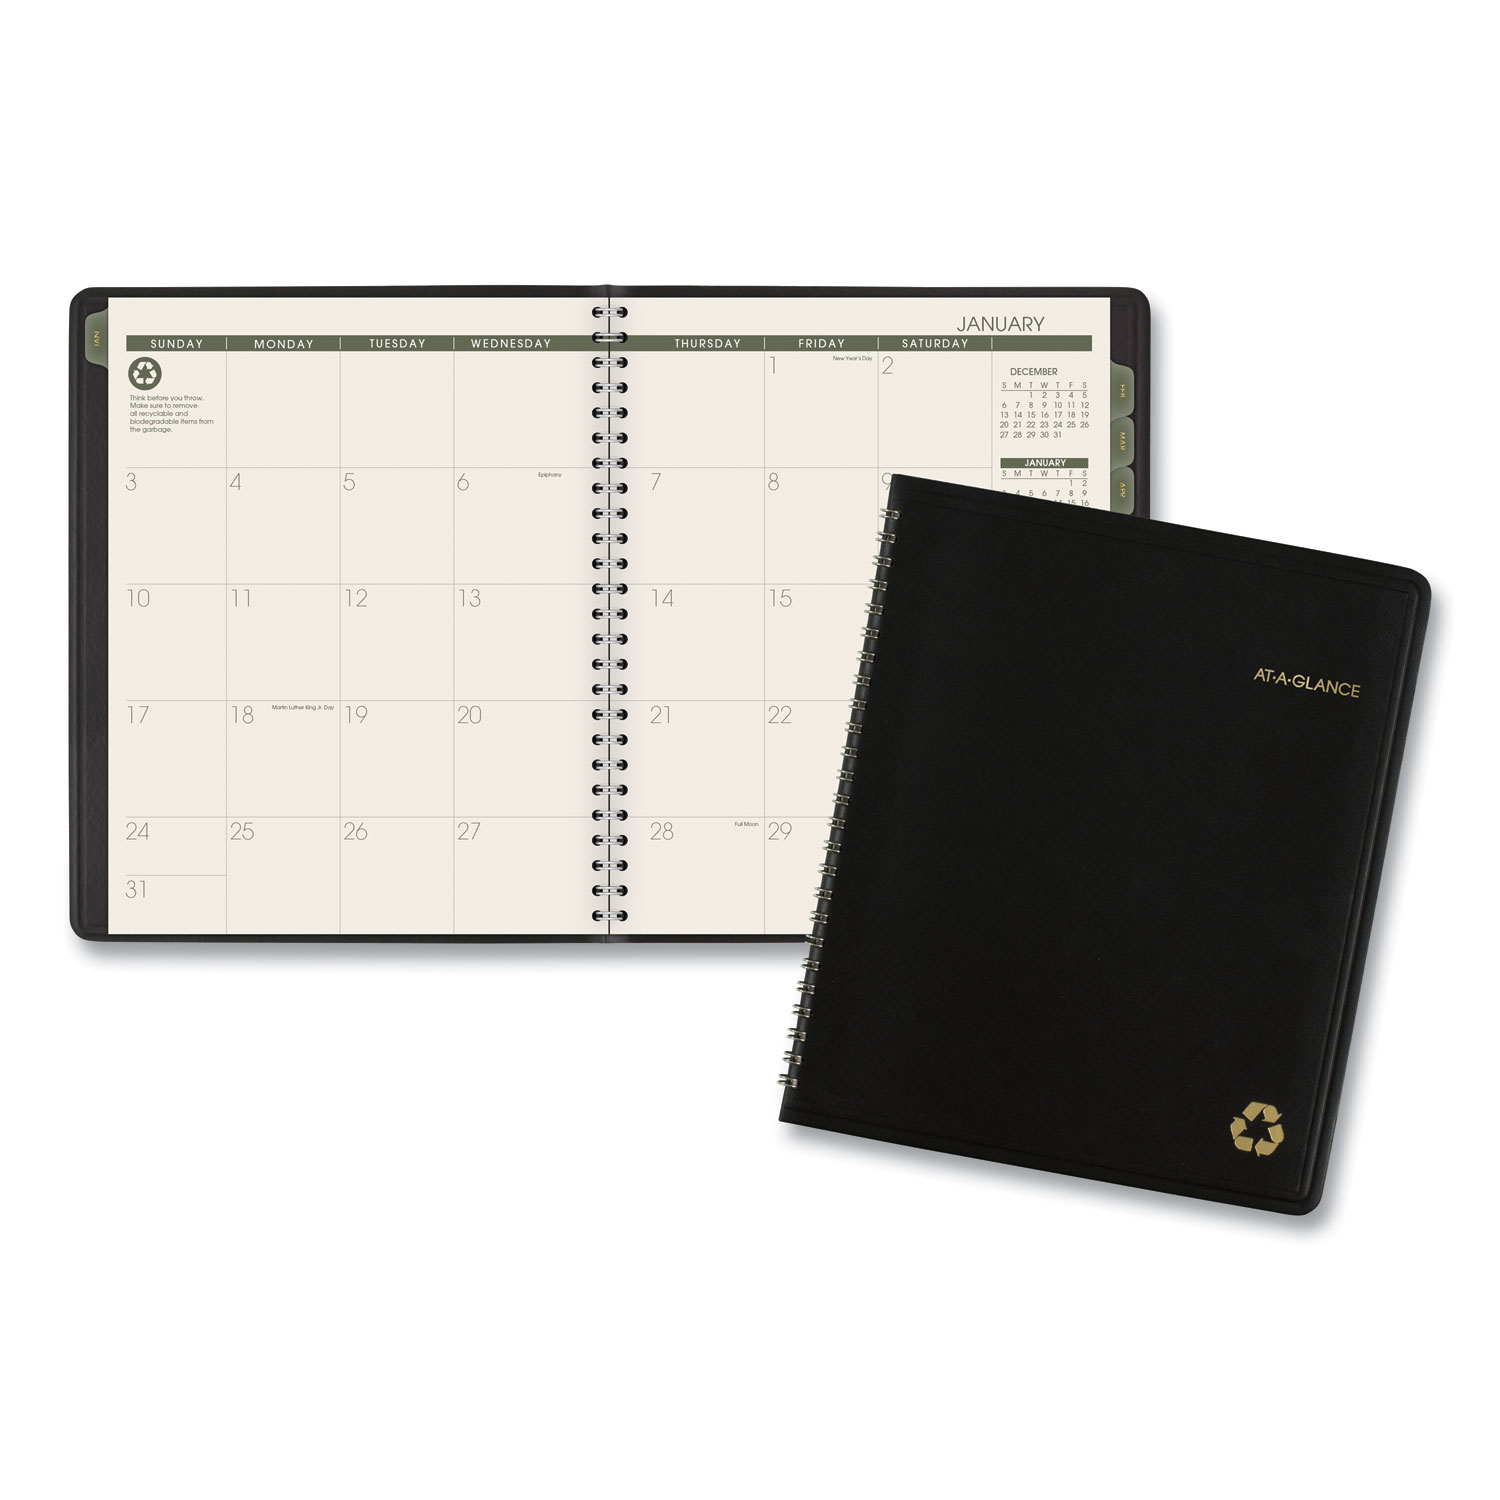  AT-A-GLANCE 70120G05 Recycled Monthly Planner, 8.75 x 6.88, Black, 2020 (AAG70120G05) 